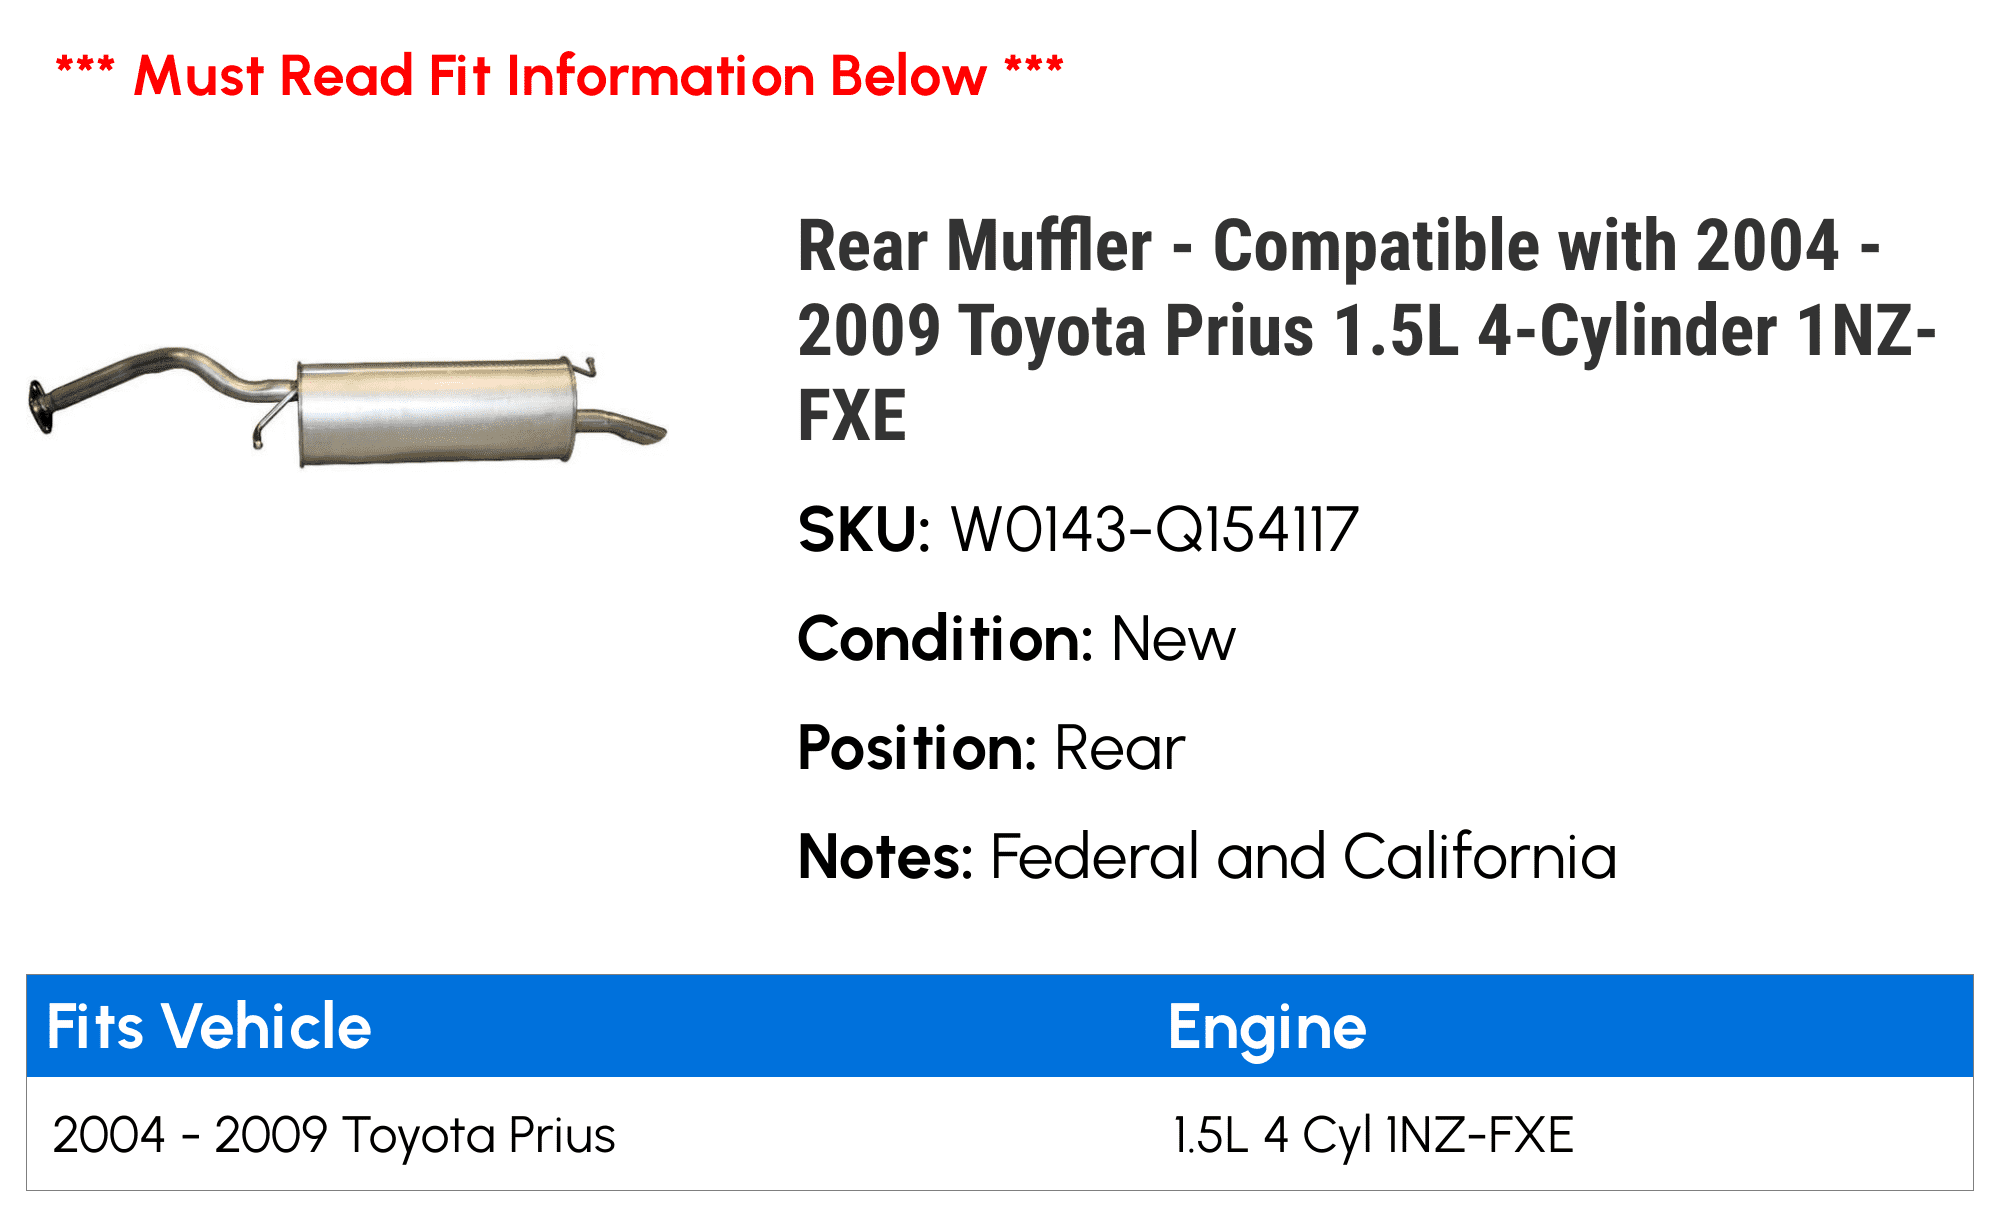 Rear Muffler Compatible with 2004-2009 Toyota Prius 1.5L 4-Cylinder 1NZ-FXE 